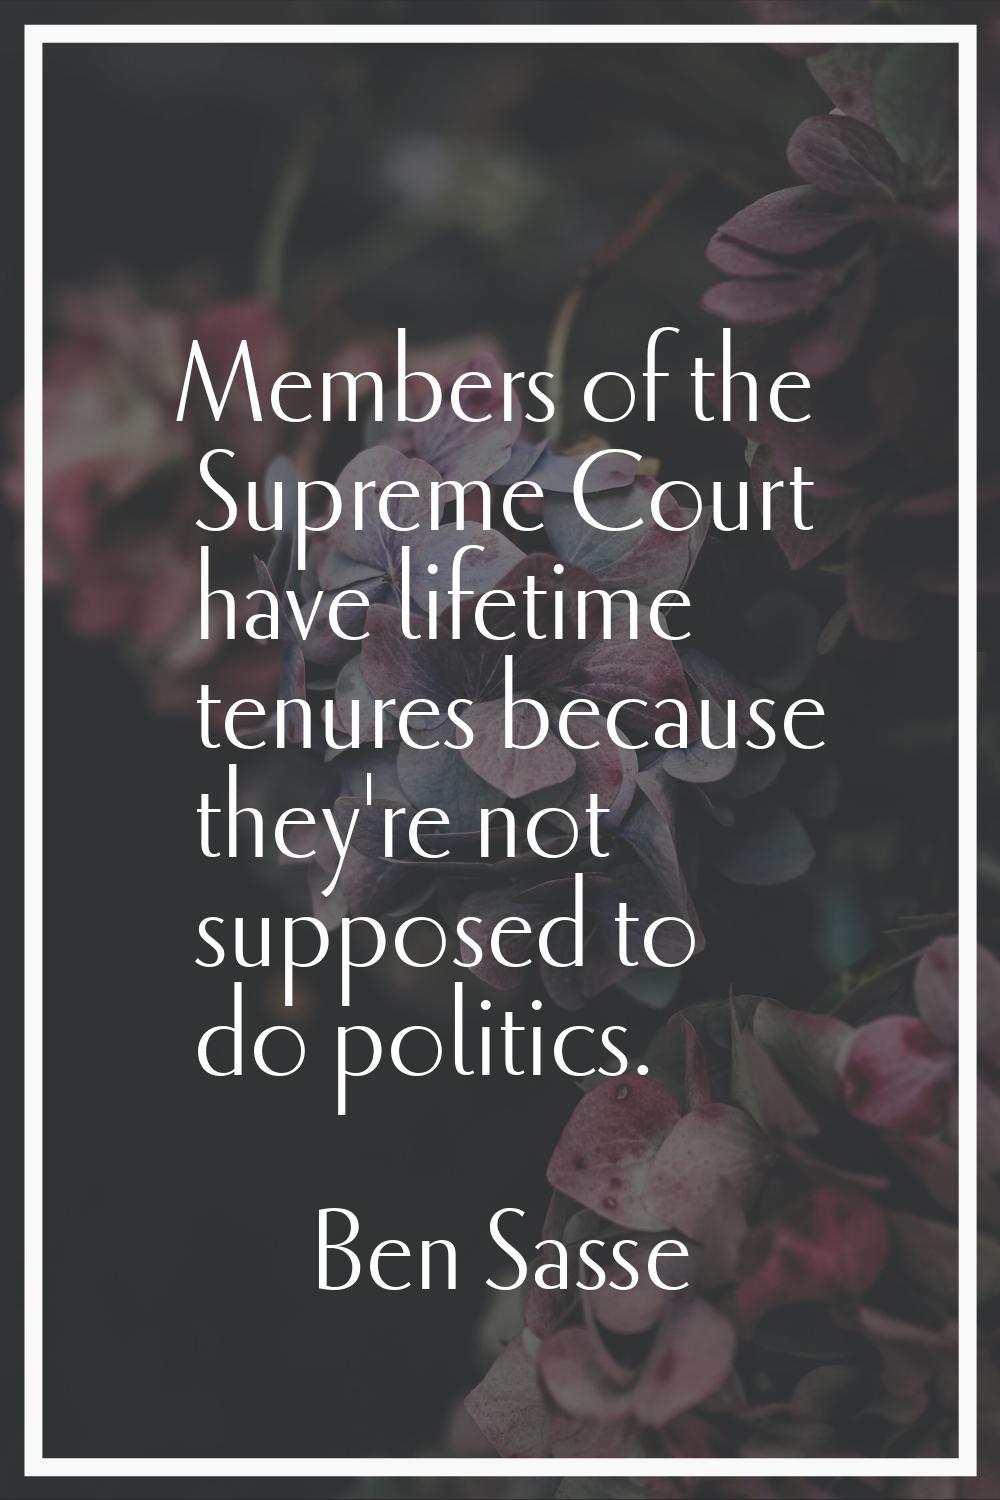 Members of the Supreme Court have lifetime tenures because they're not supposed to do politics.